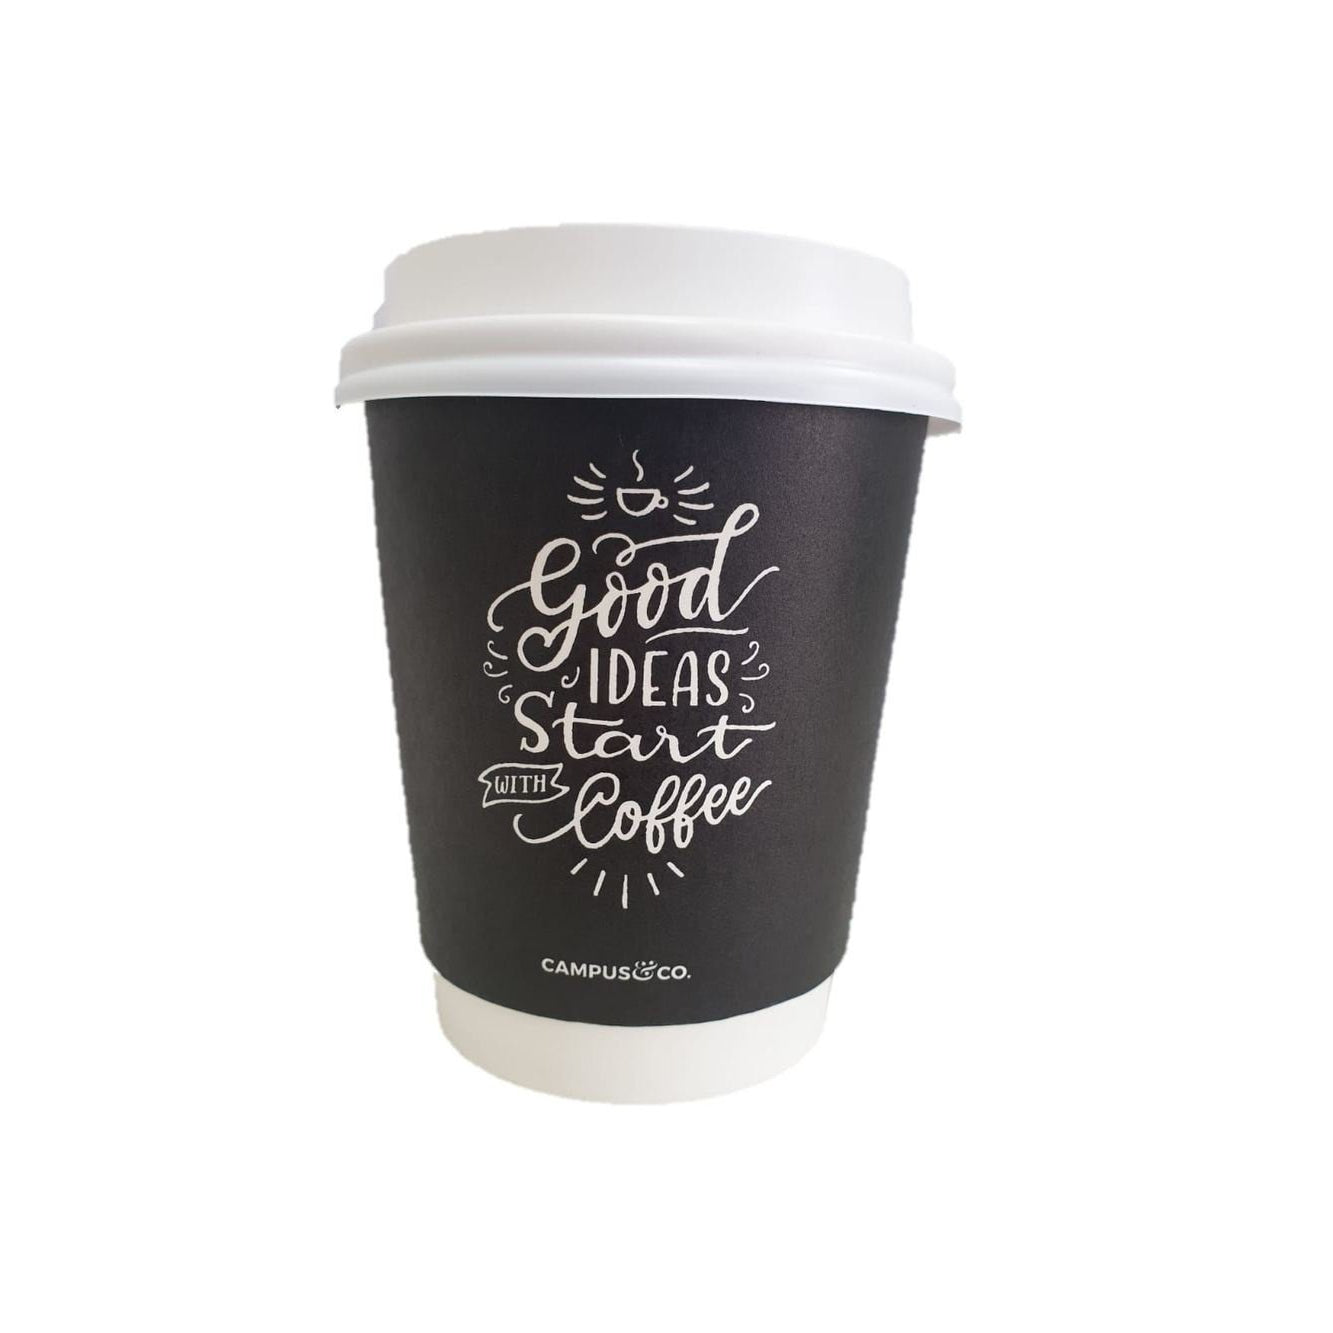 Campus & Co Disposable Double Wall Coffee Cup Like it Design on Black 8oz/25 sleeve